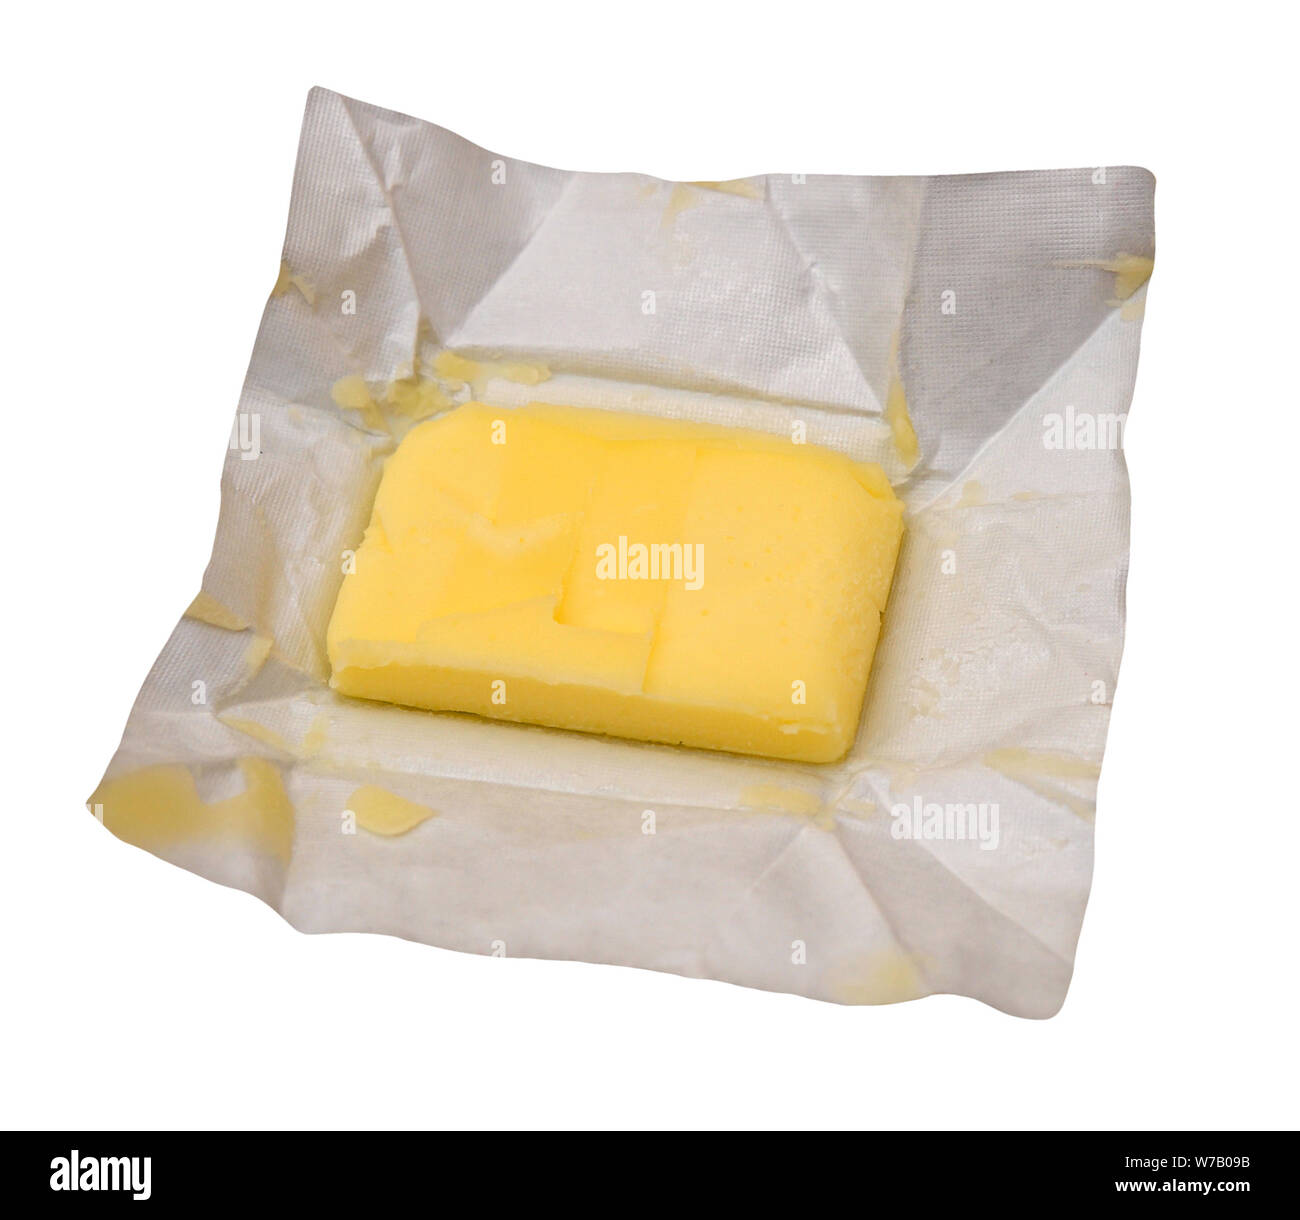 unwrapped butter isolate on white background Stock Photo